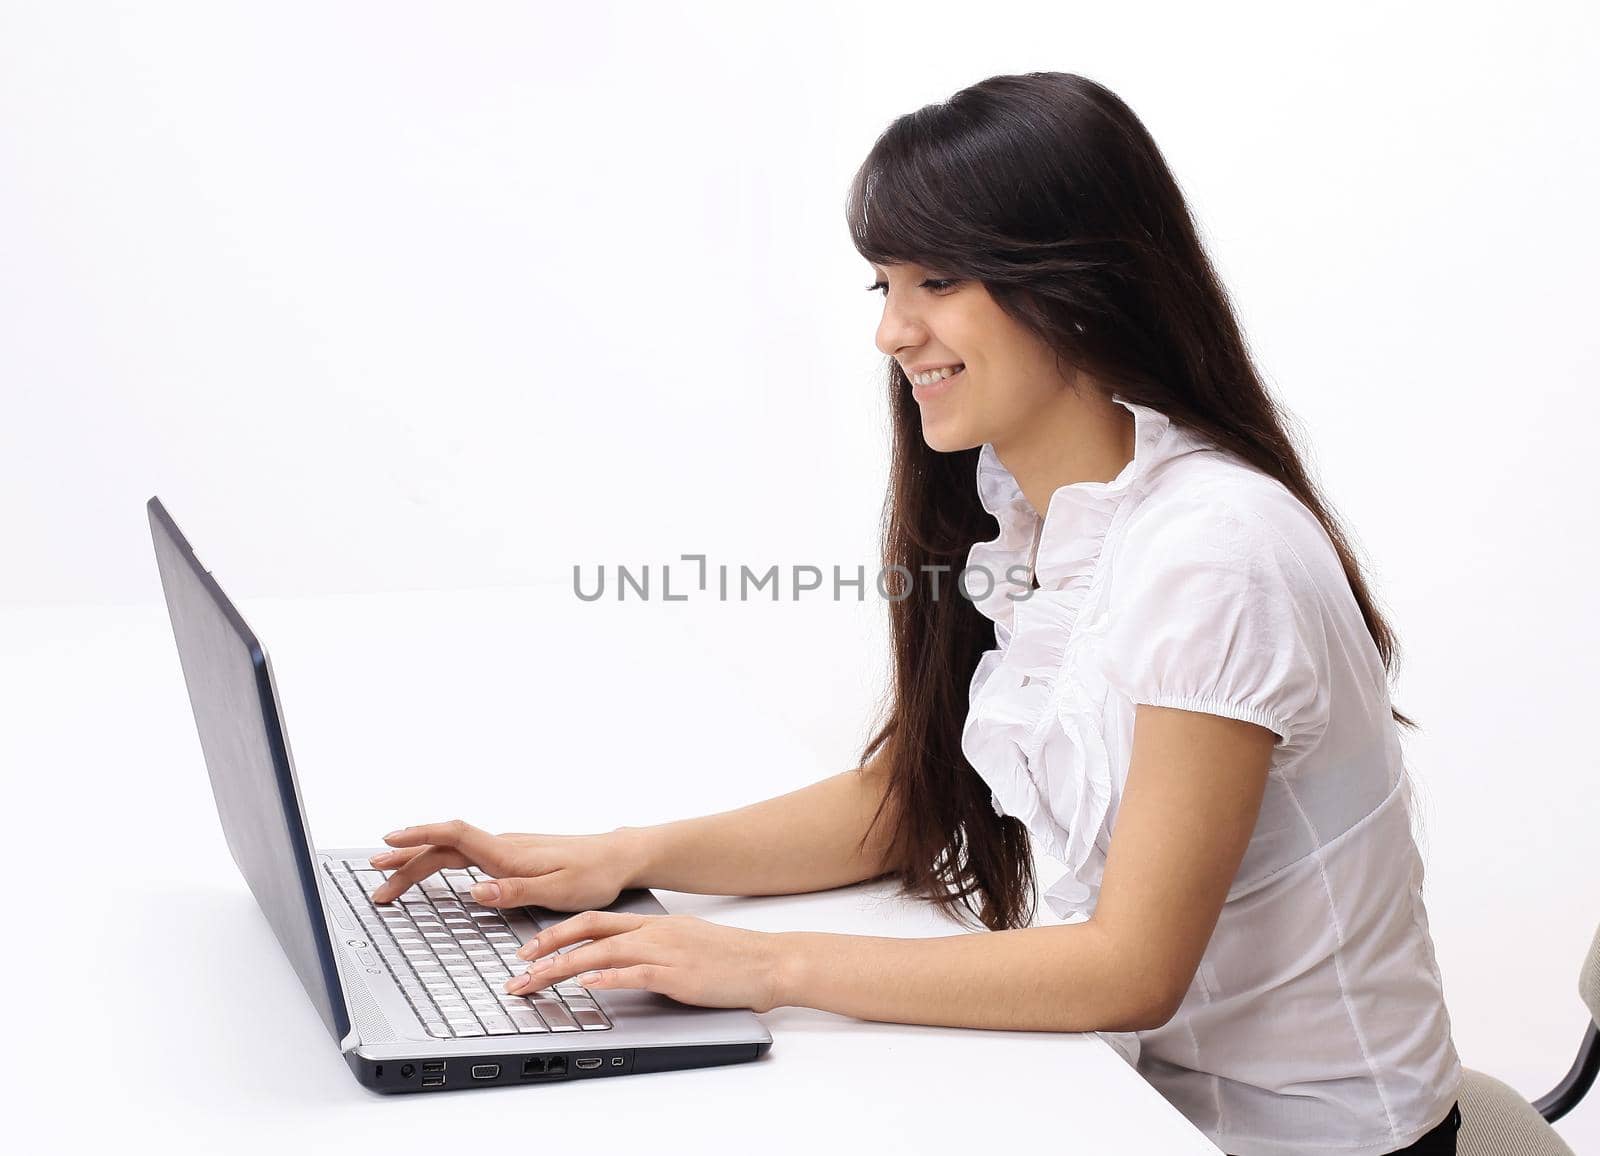 young woman typing text on laptop keyboard by SmartPhotoLab